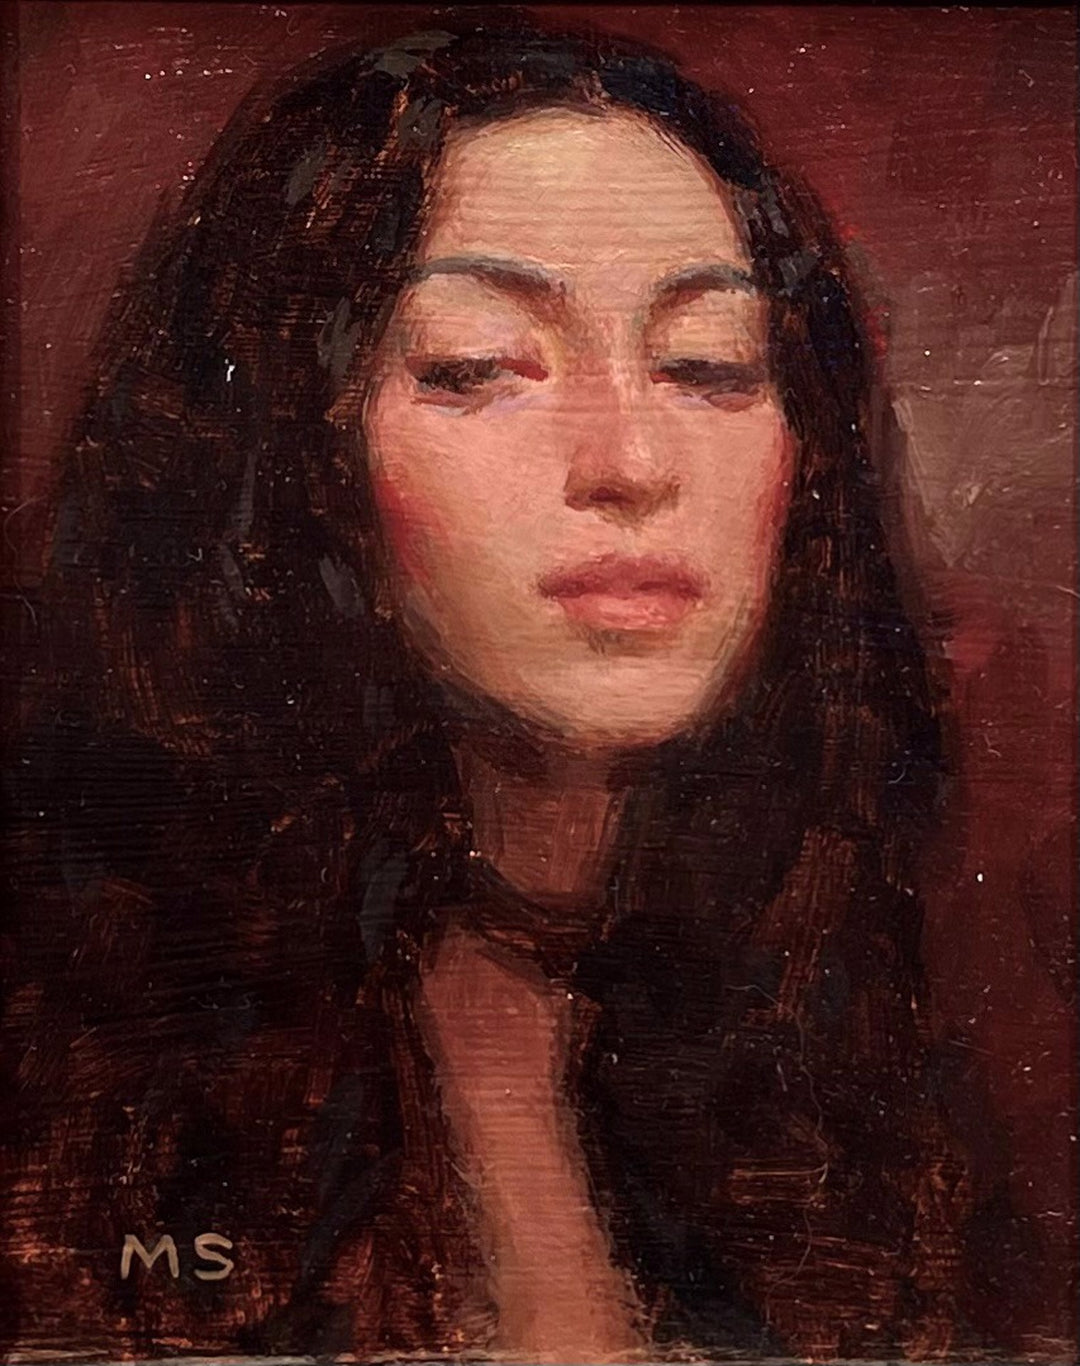 A stunning painting of a woman with long hair by Mark Bradley Schwartz's "M.Y. 3", rendered in oil on board.